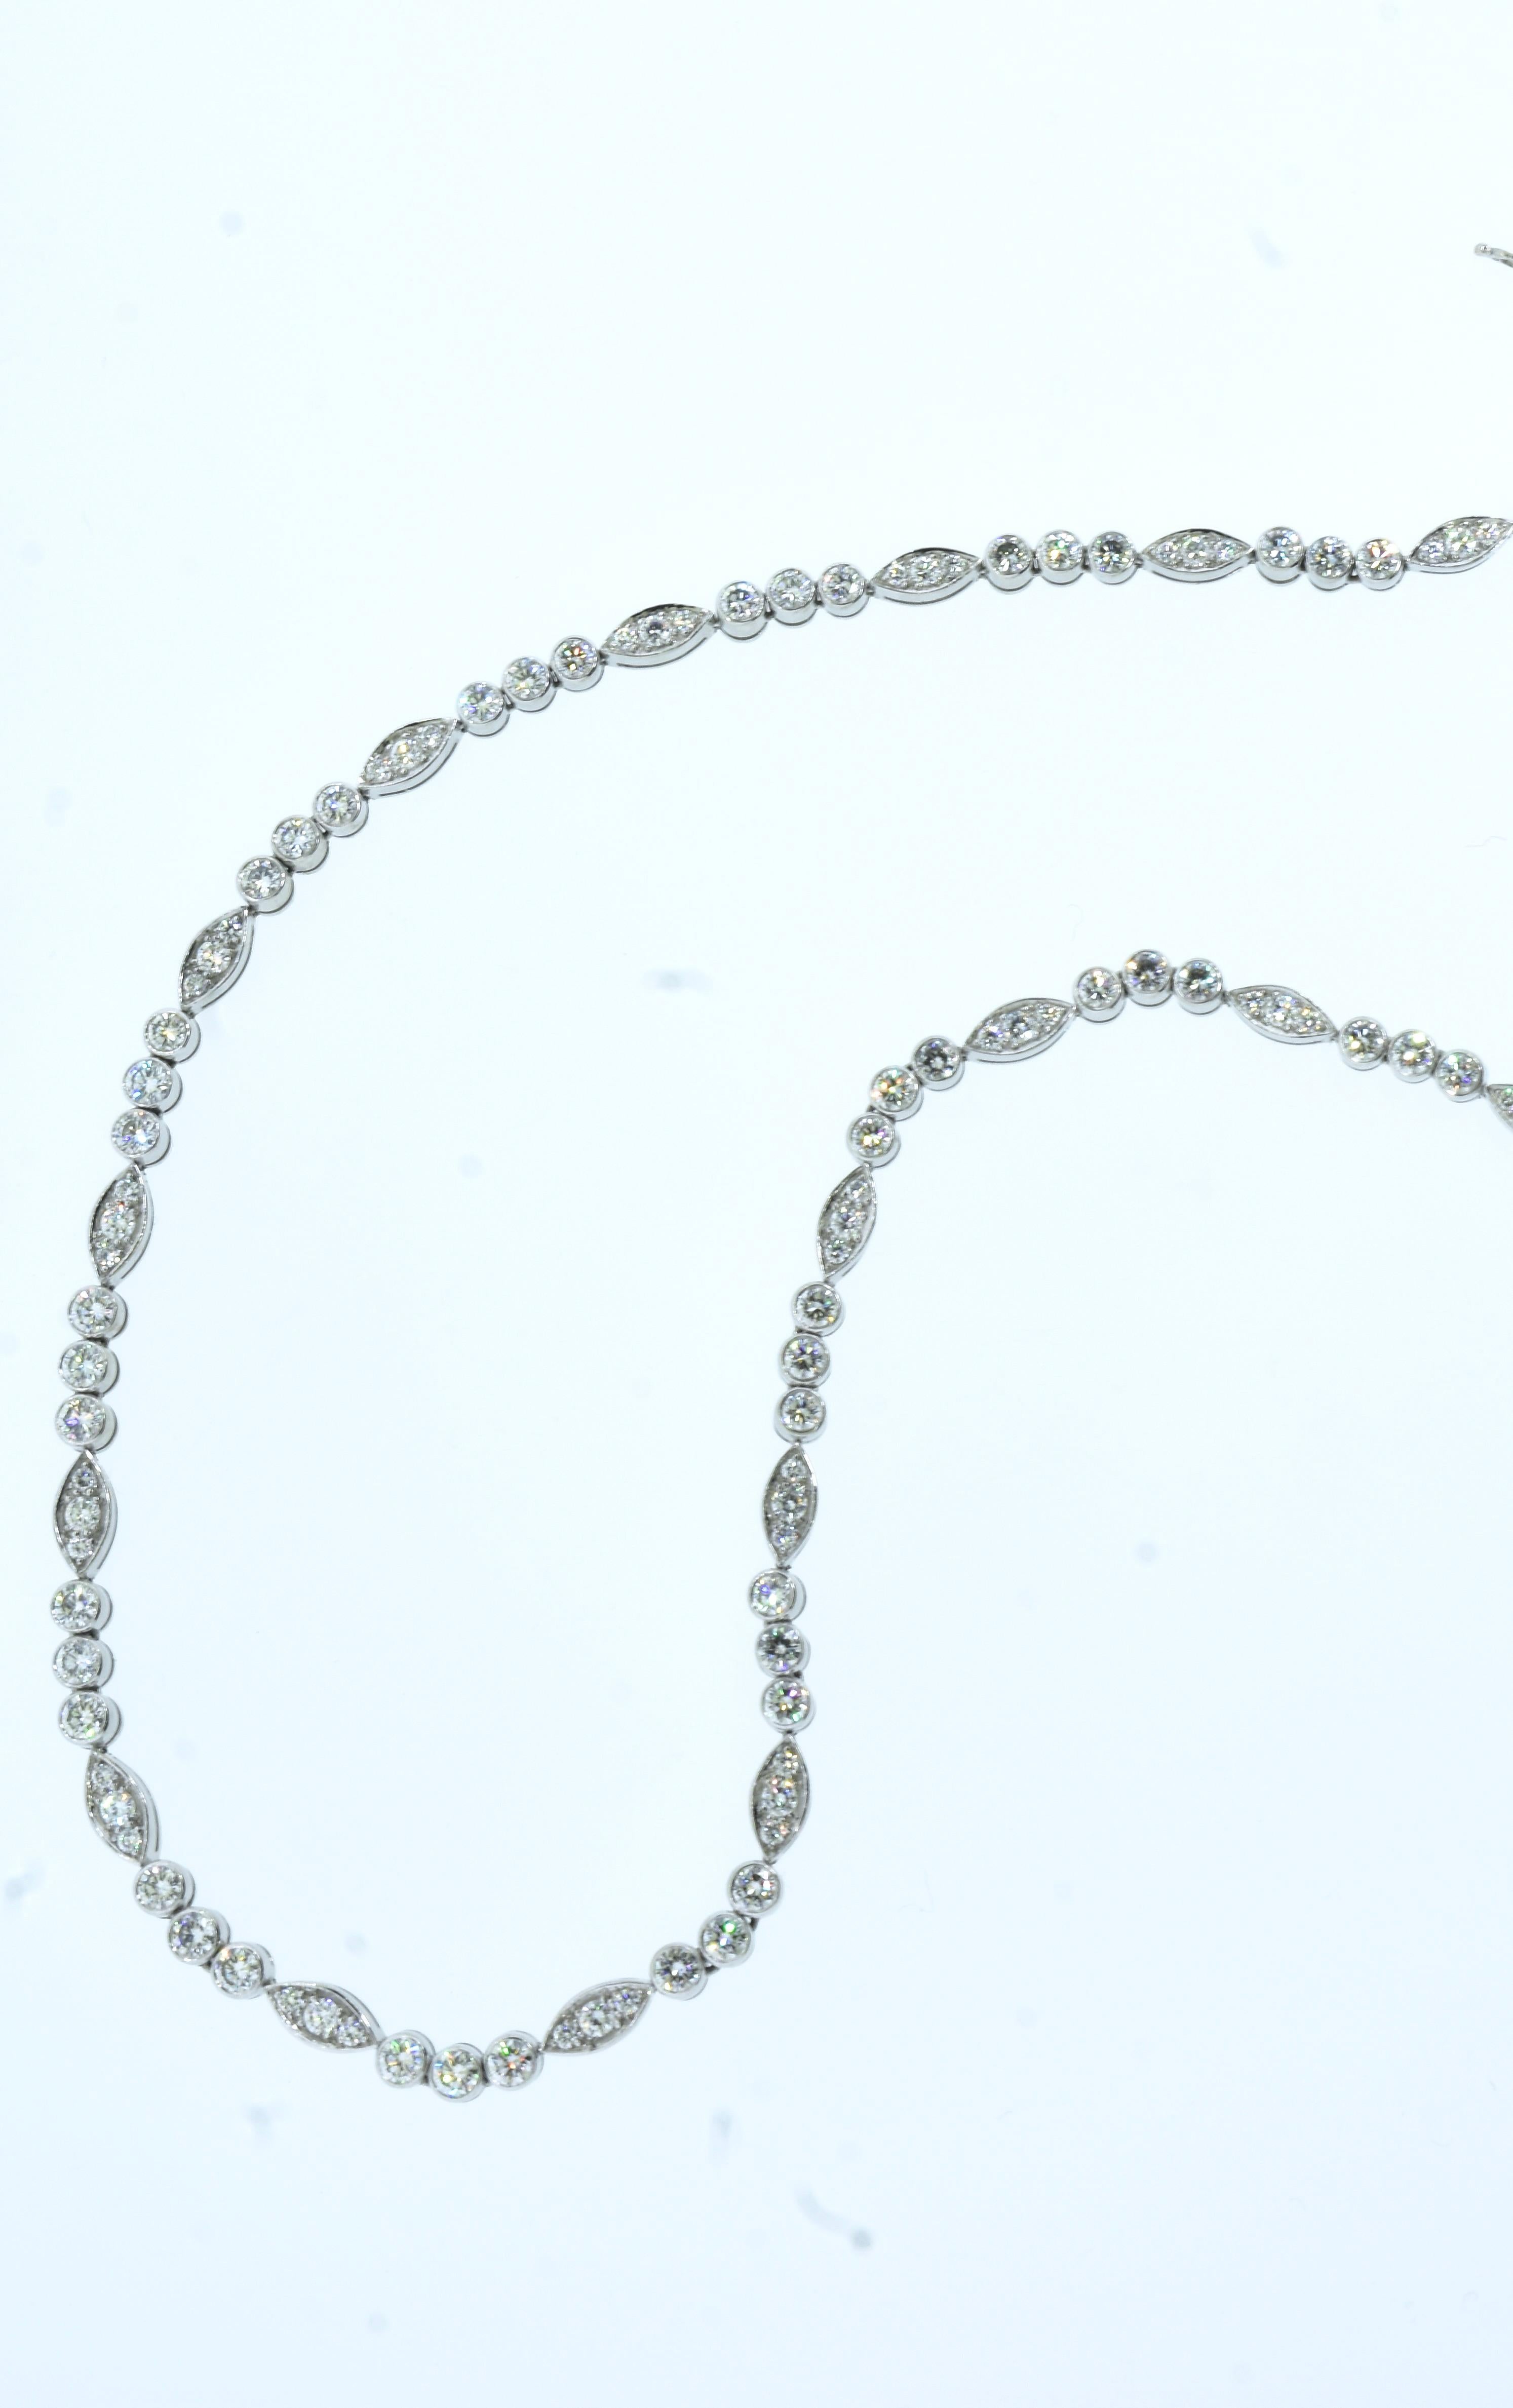 Cartier Paris platinum and diamond necklace.  The 120 well matched round brilliant cut diamonds are estimated to be colorless (E/F),  very very slightly included (VVS) and weigh totally 10 cts.  The clasp is invisible and well made with a safety